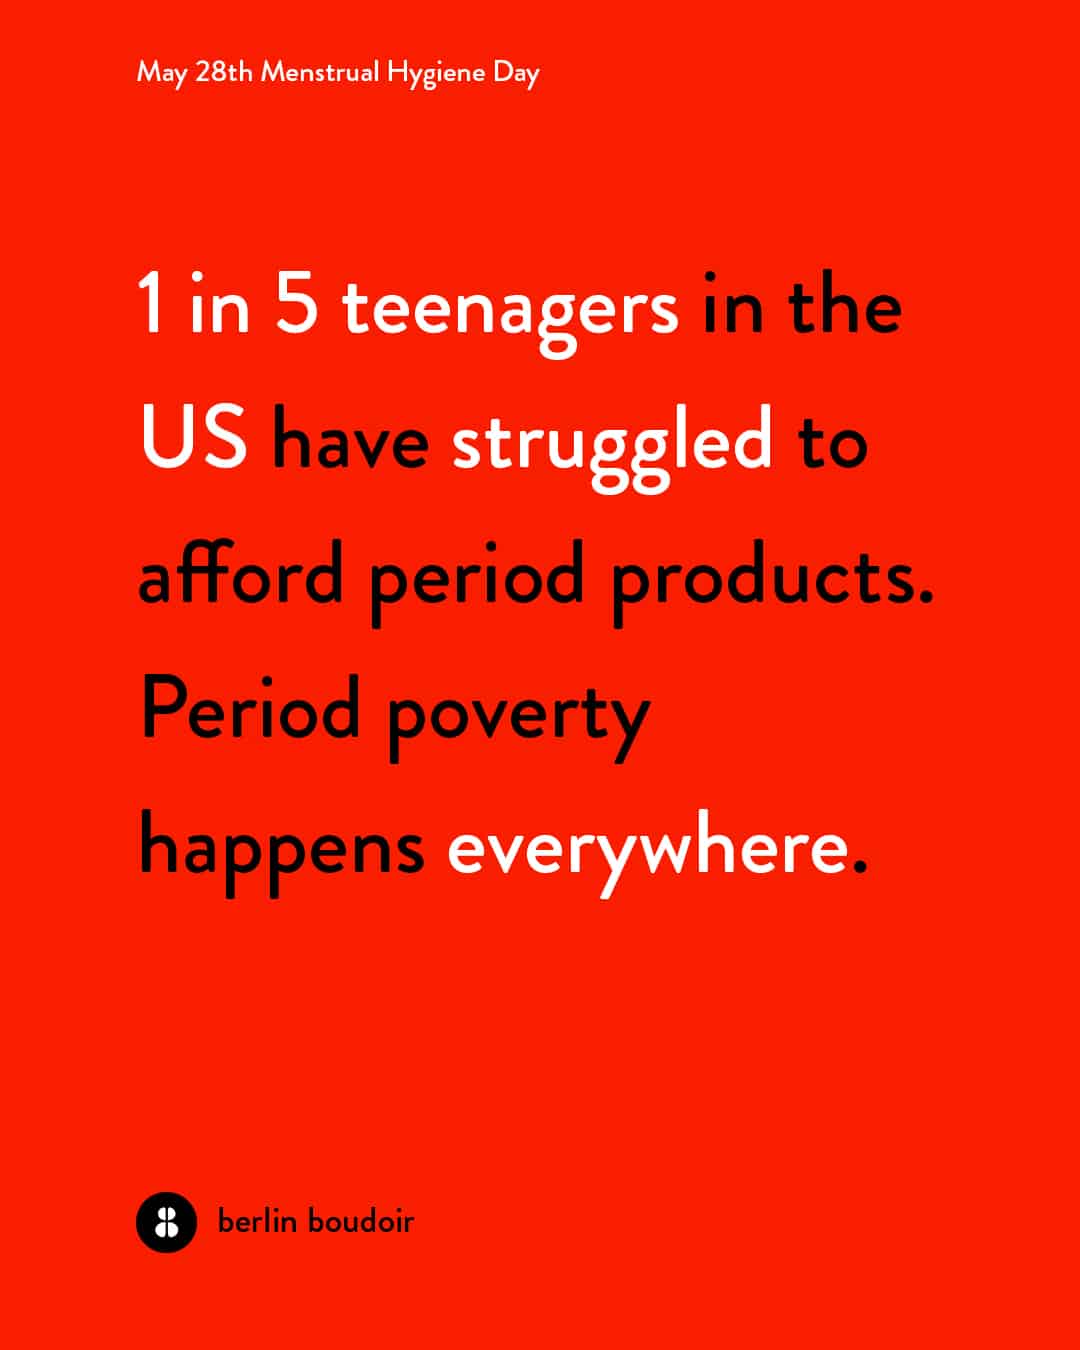 1 in 5 teenagers in the US have struggled to afford period products. Period poverty happens everywhere.